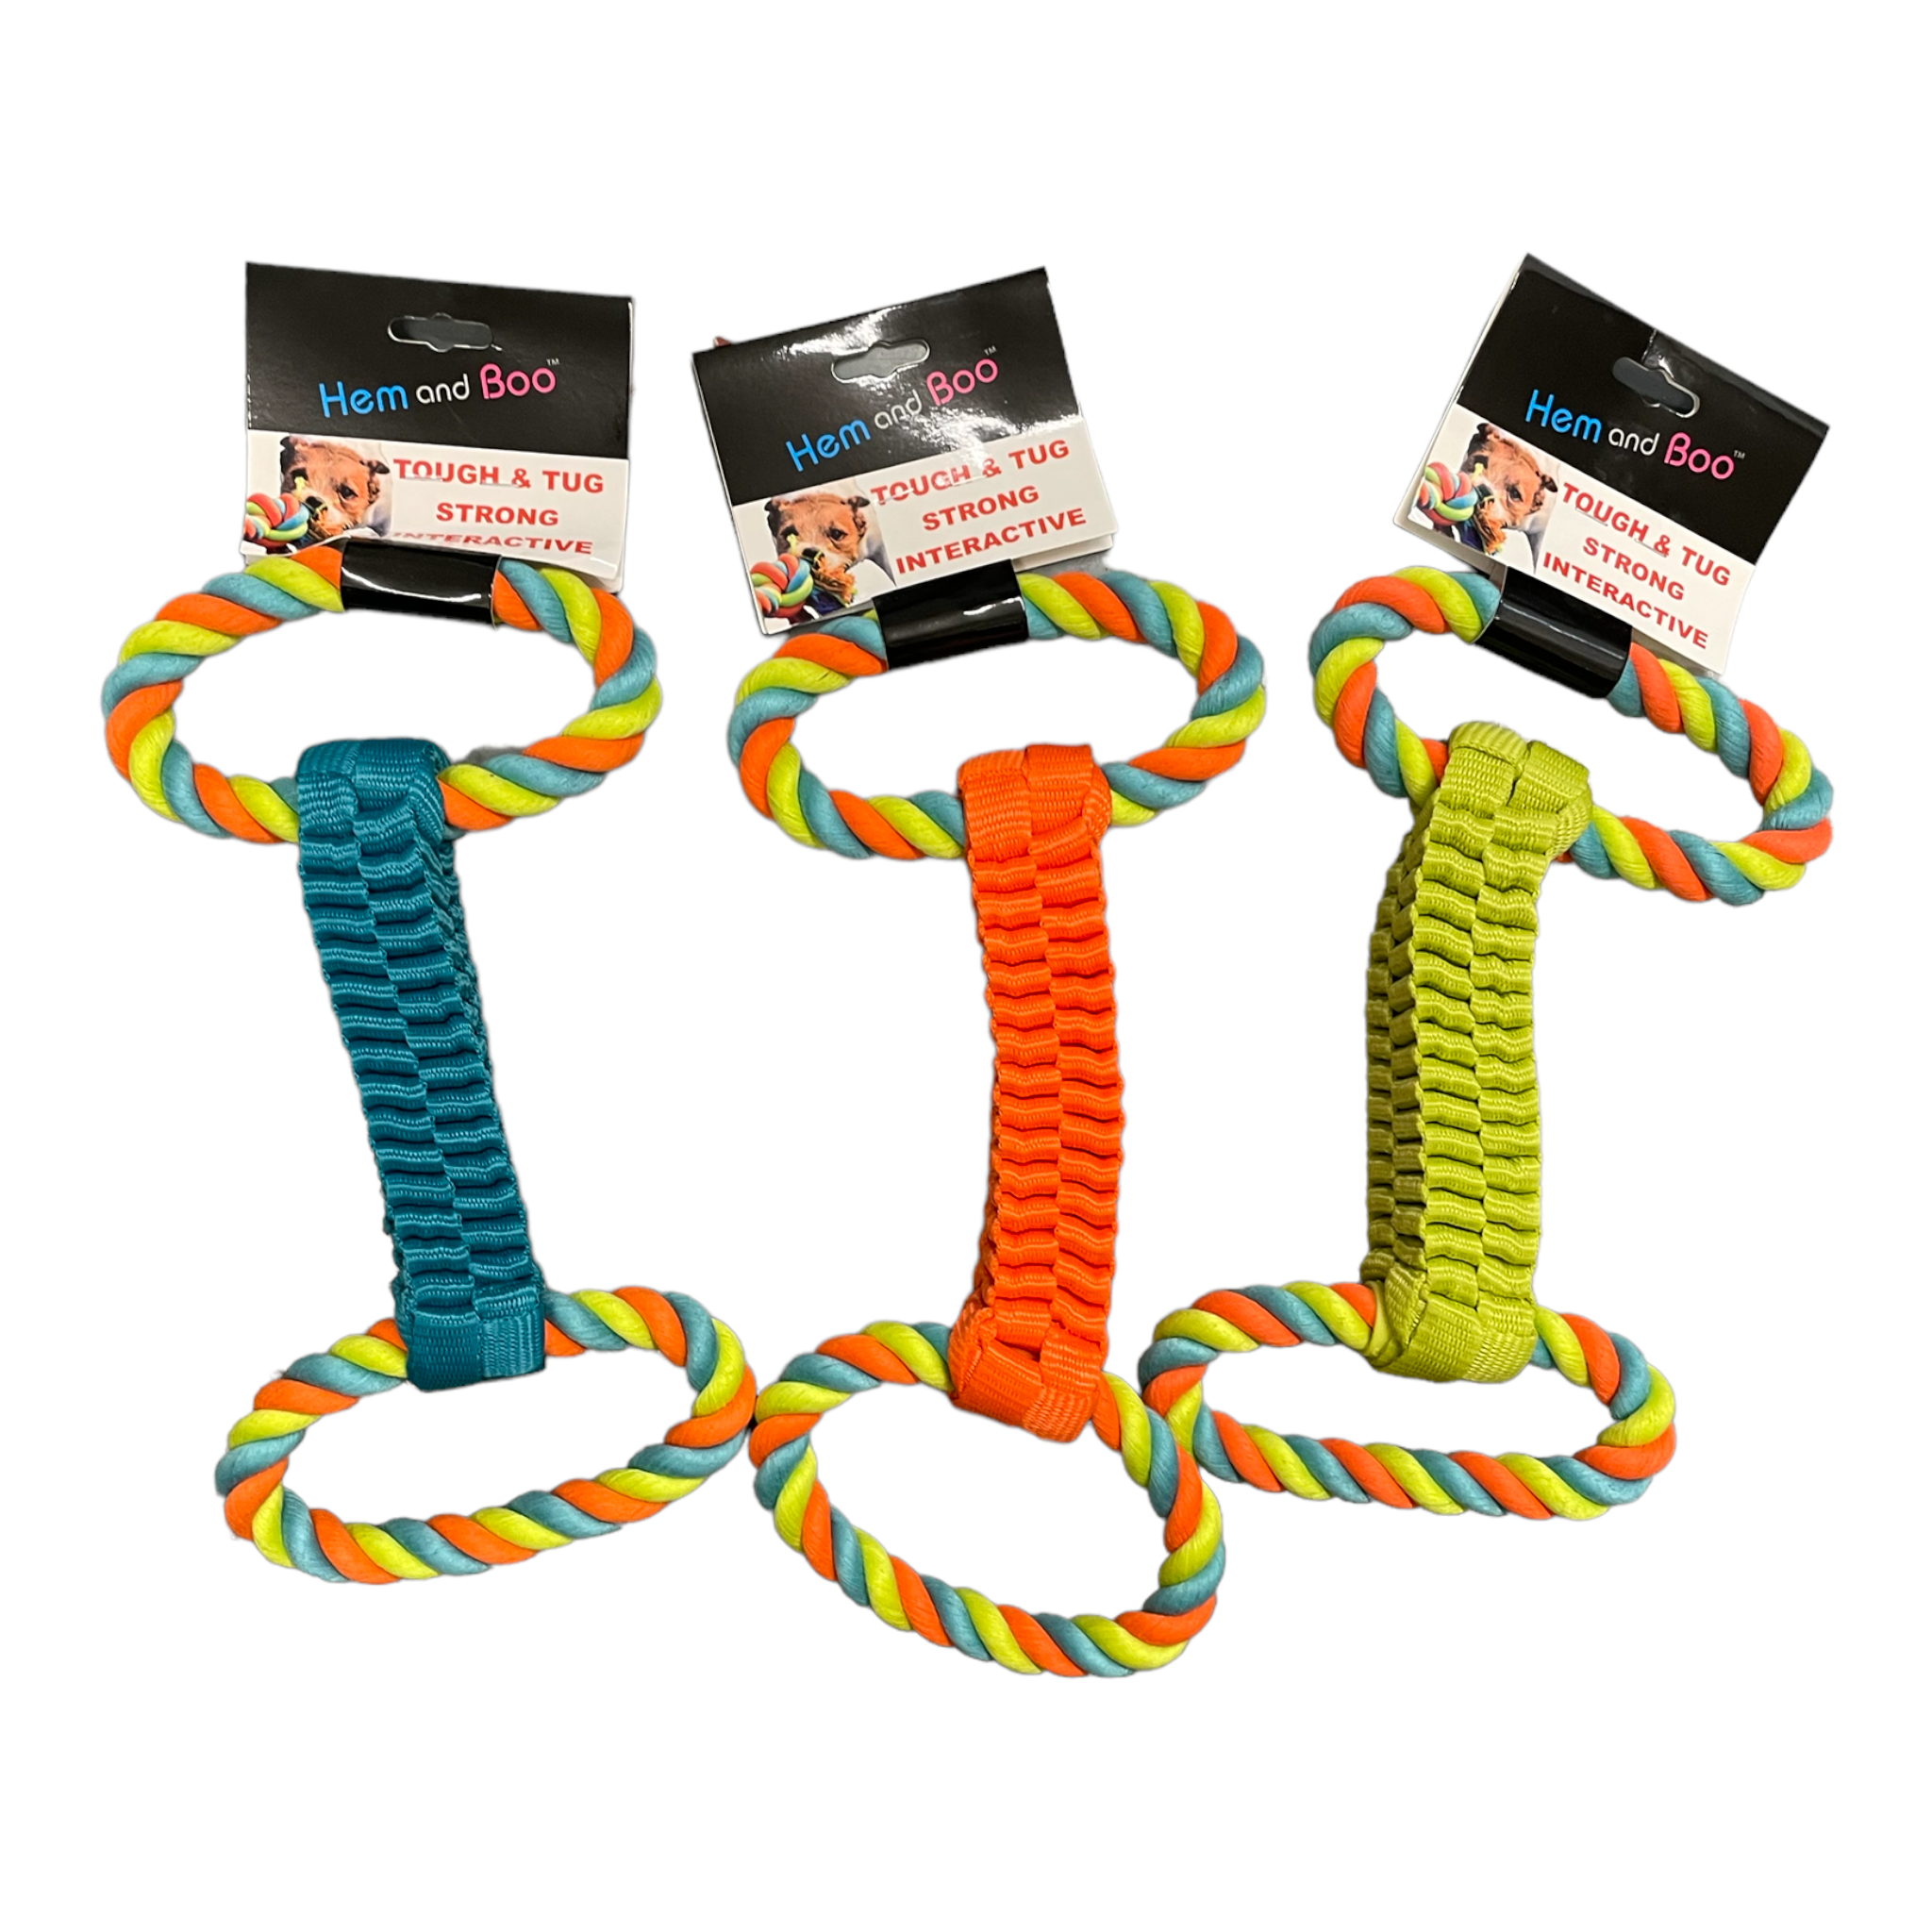 Hem and Boo Tough and Tug Plaited Rope with Handle